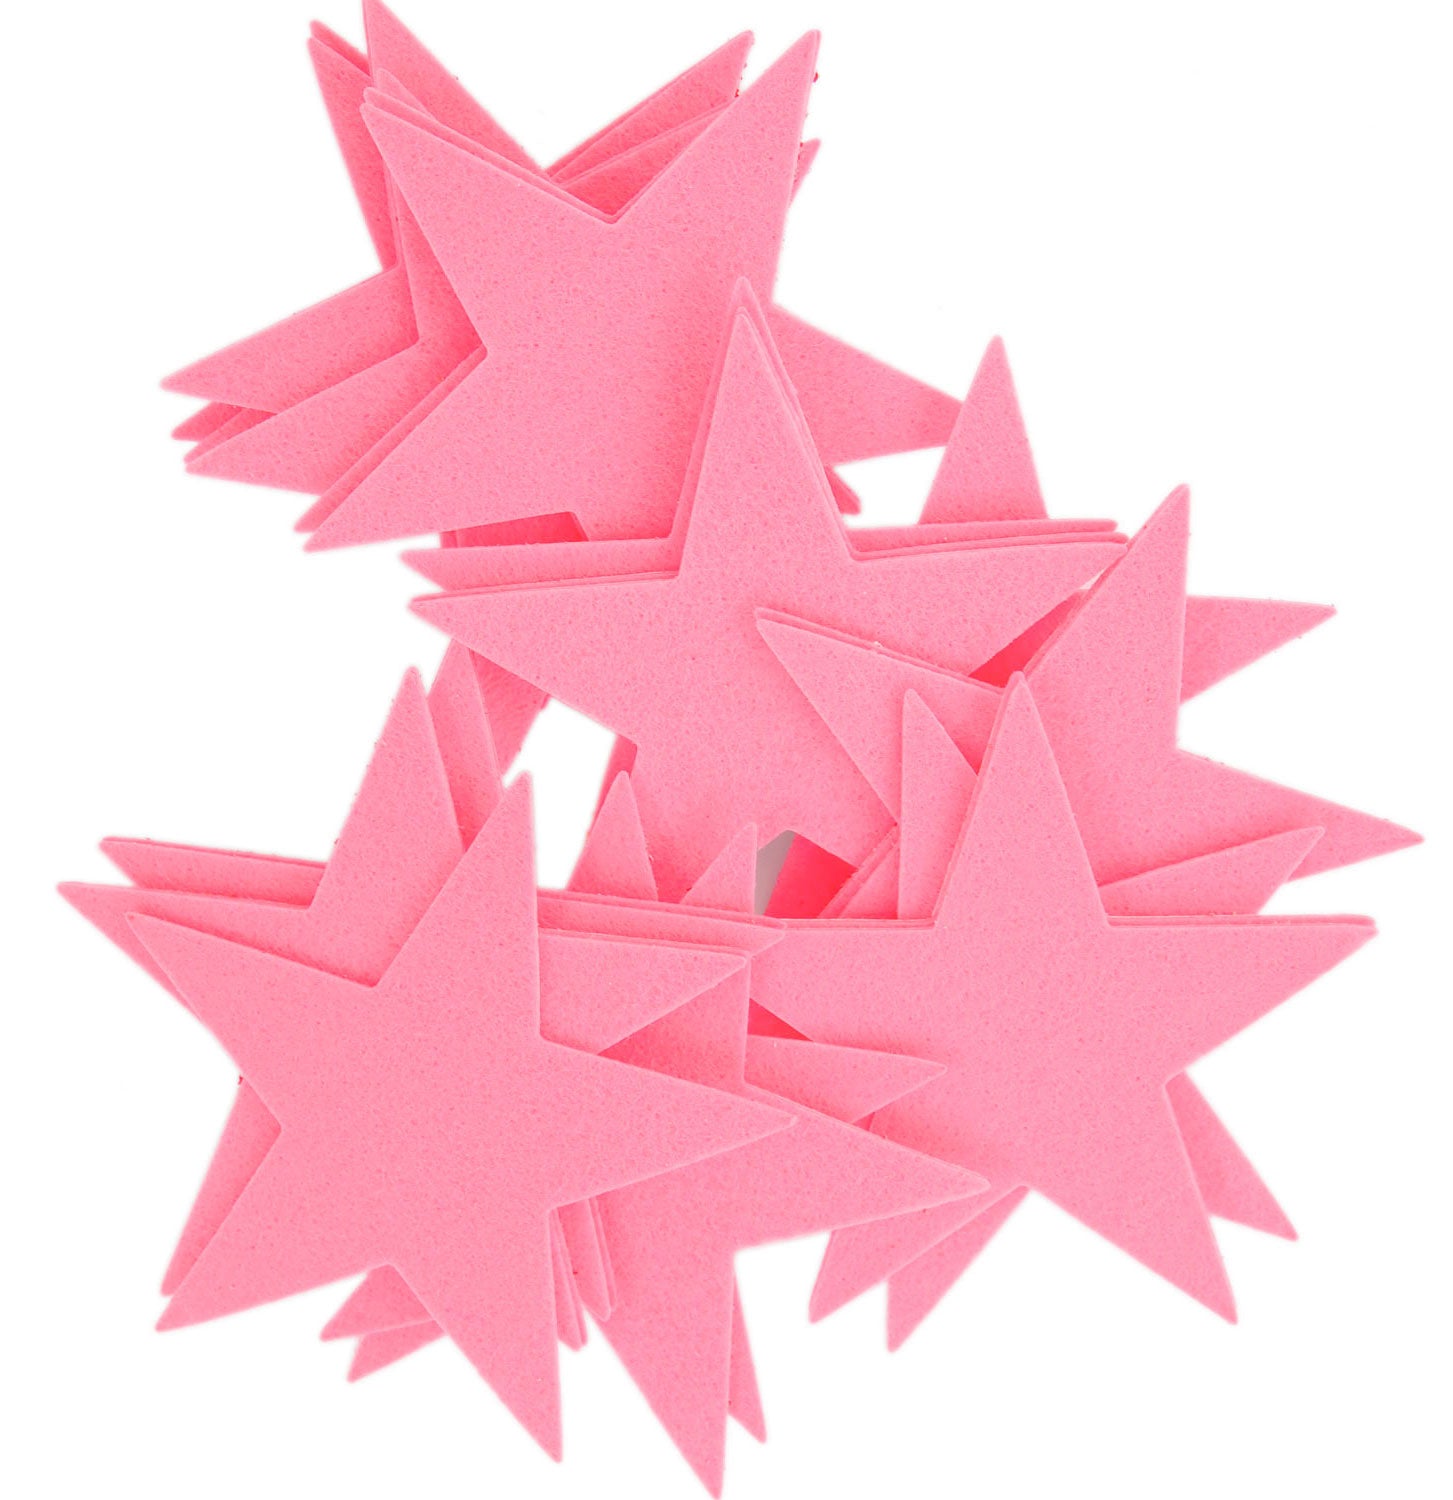 Mixed Color Assortment Felt Star Stickers (1.5 to 3 Inch